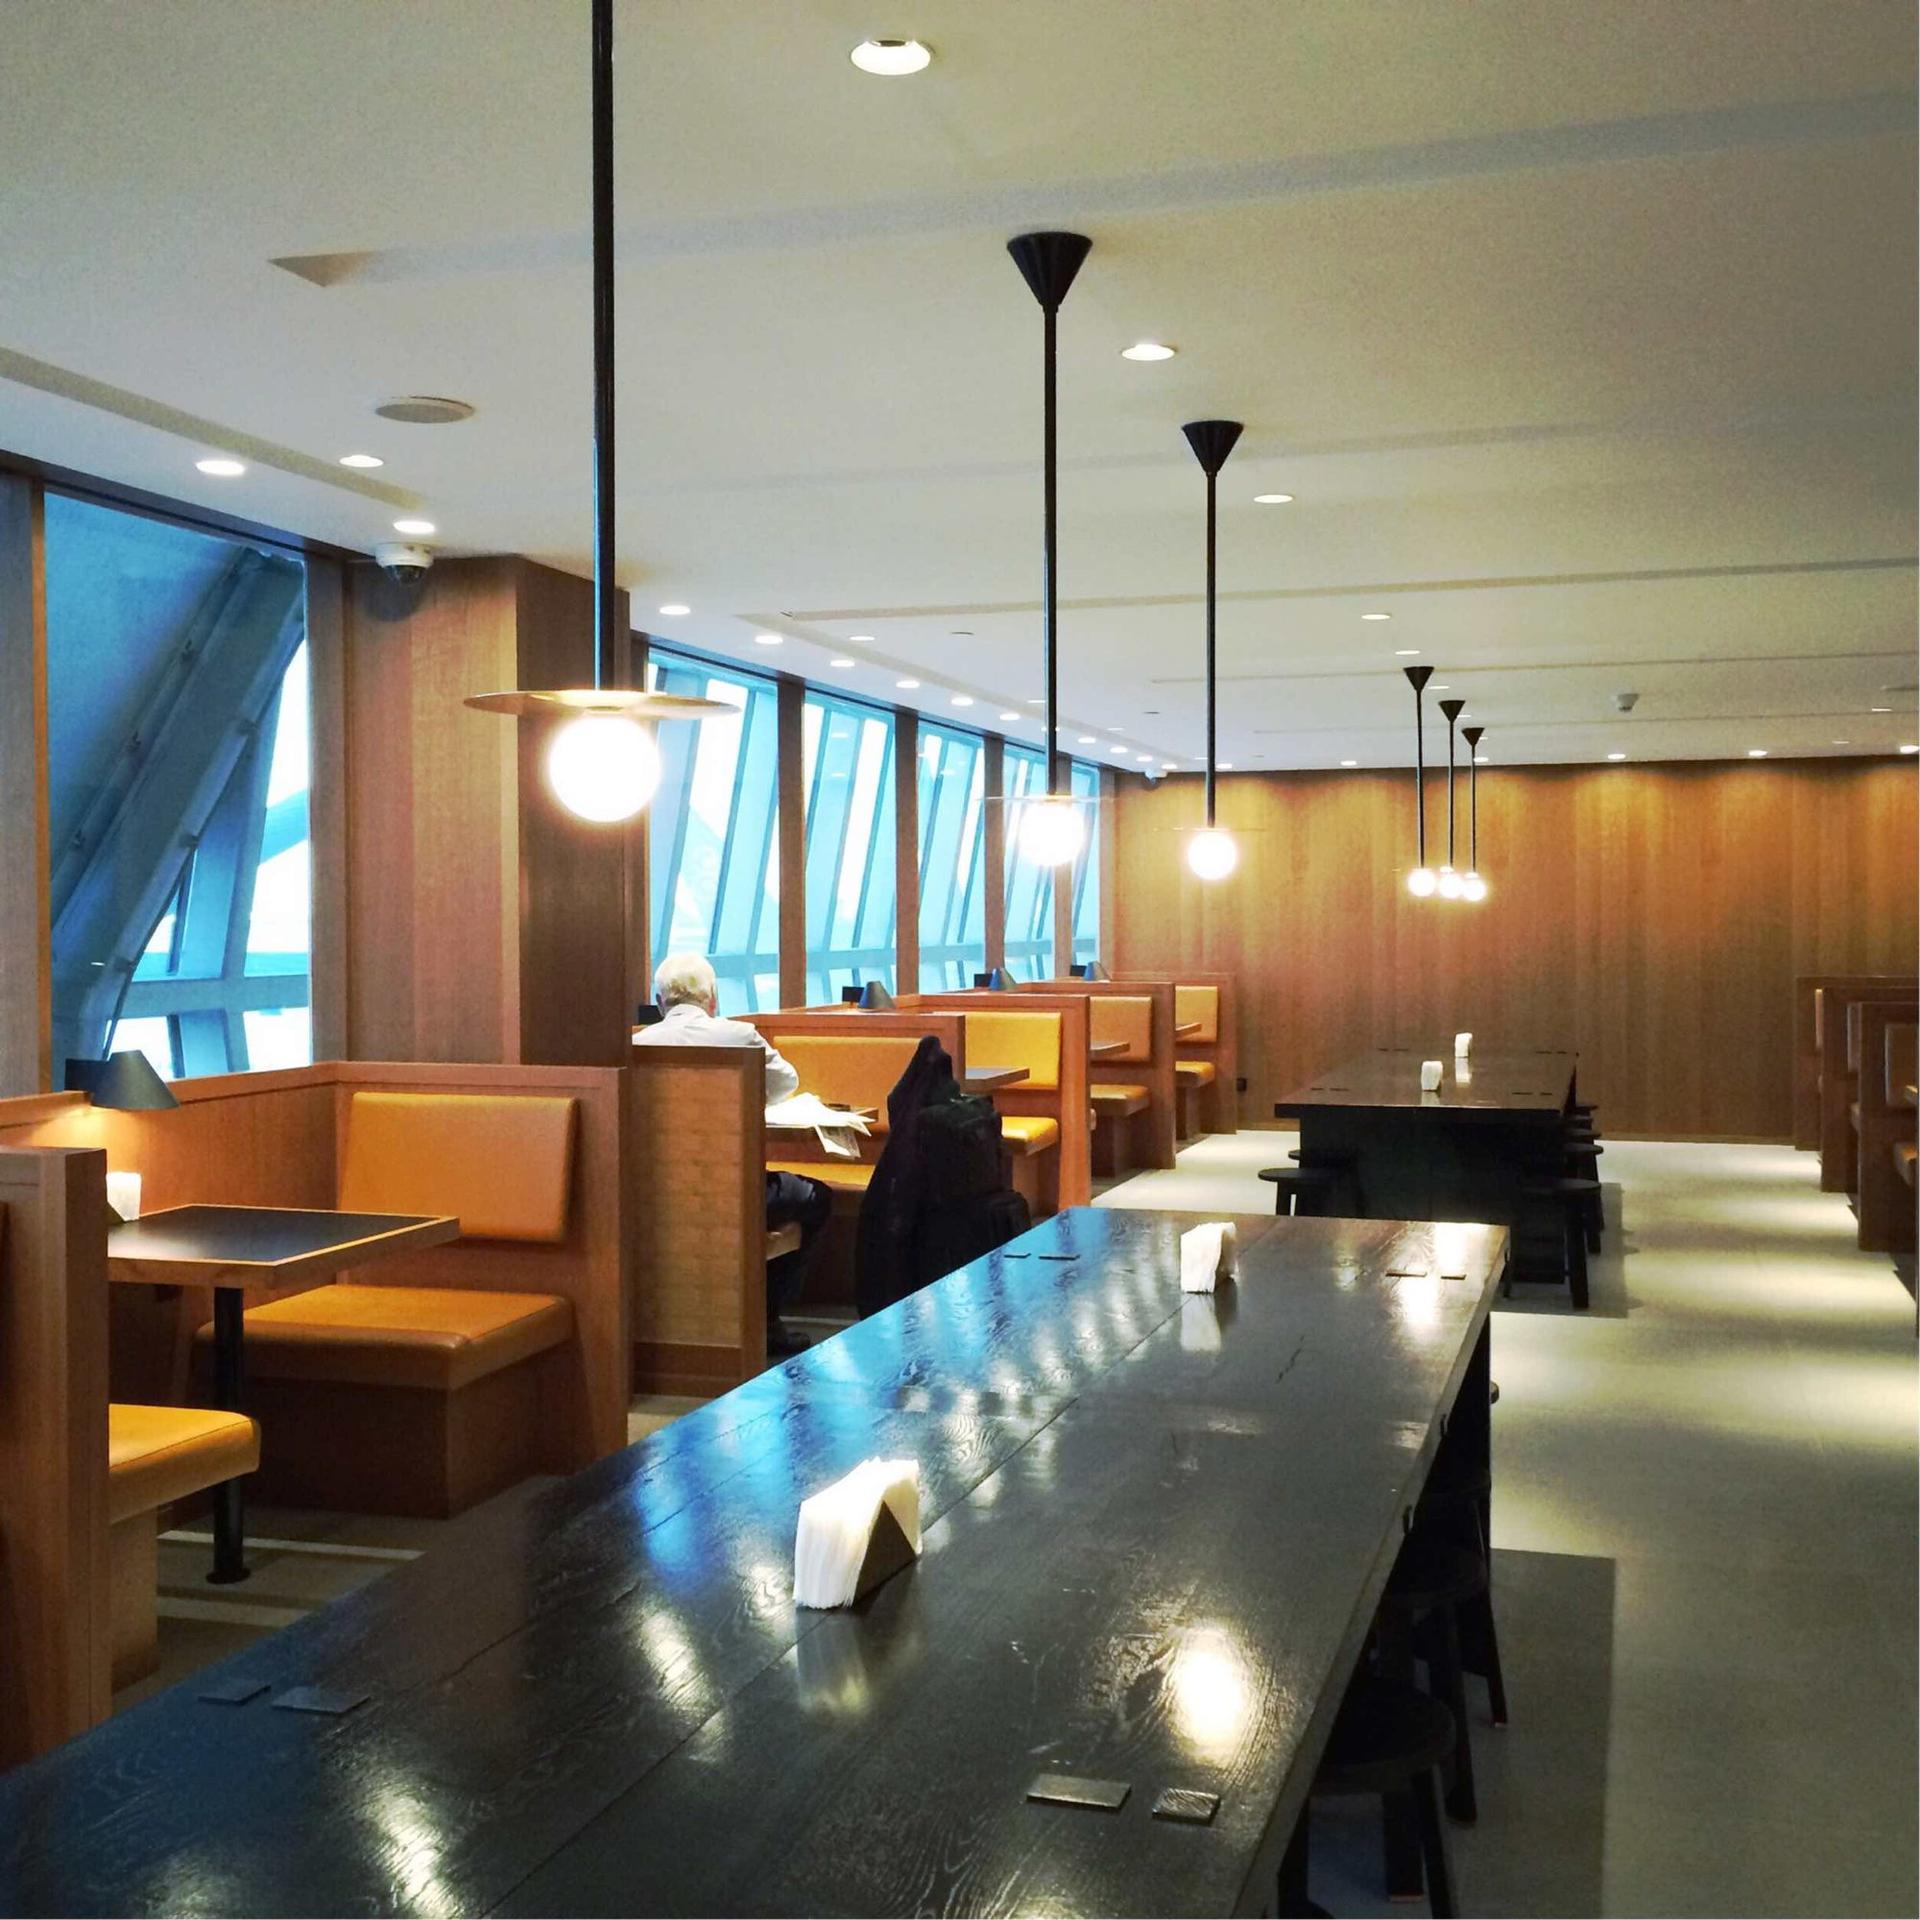 Cathay Pacific First and Business Class Lounge image 3 of 69